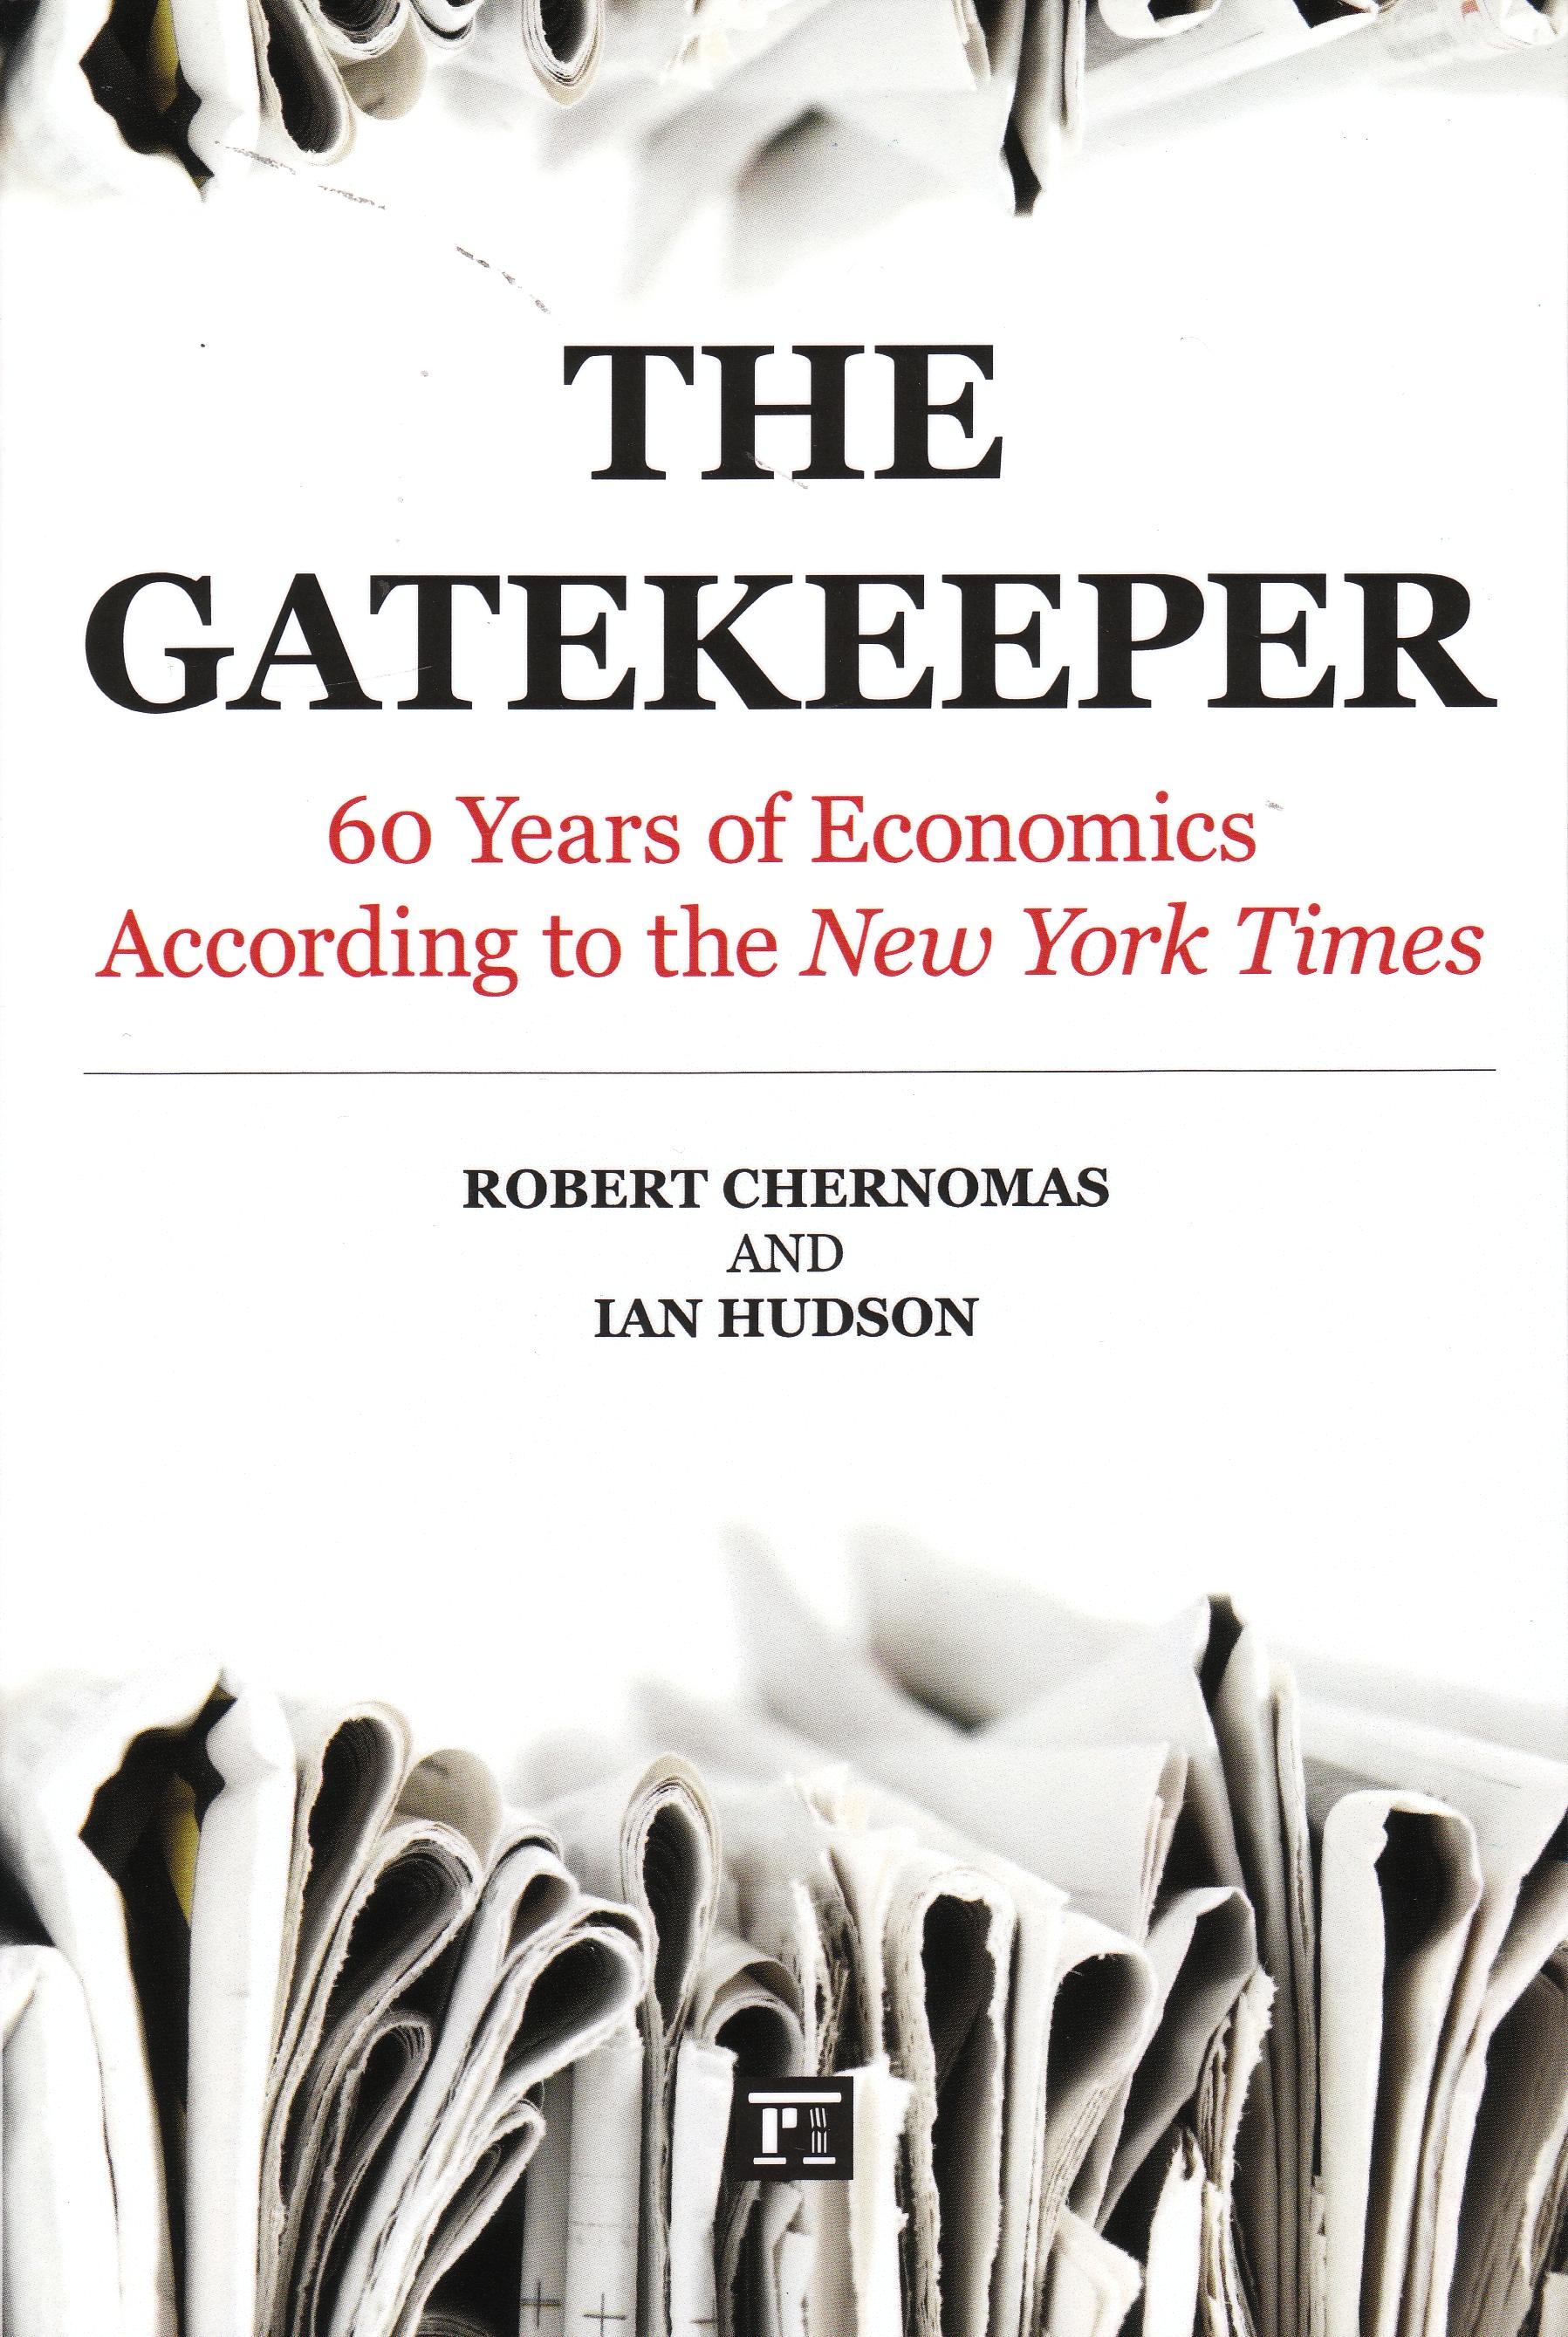 The Gatekeeper "60 Years of Economics According to the New York Times"